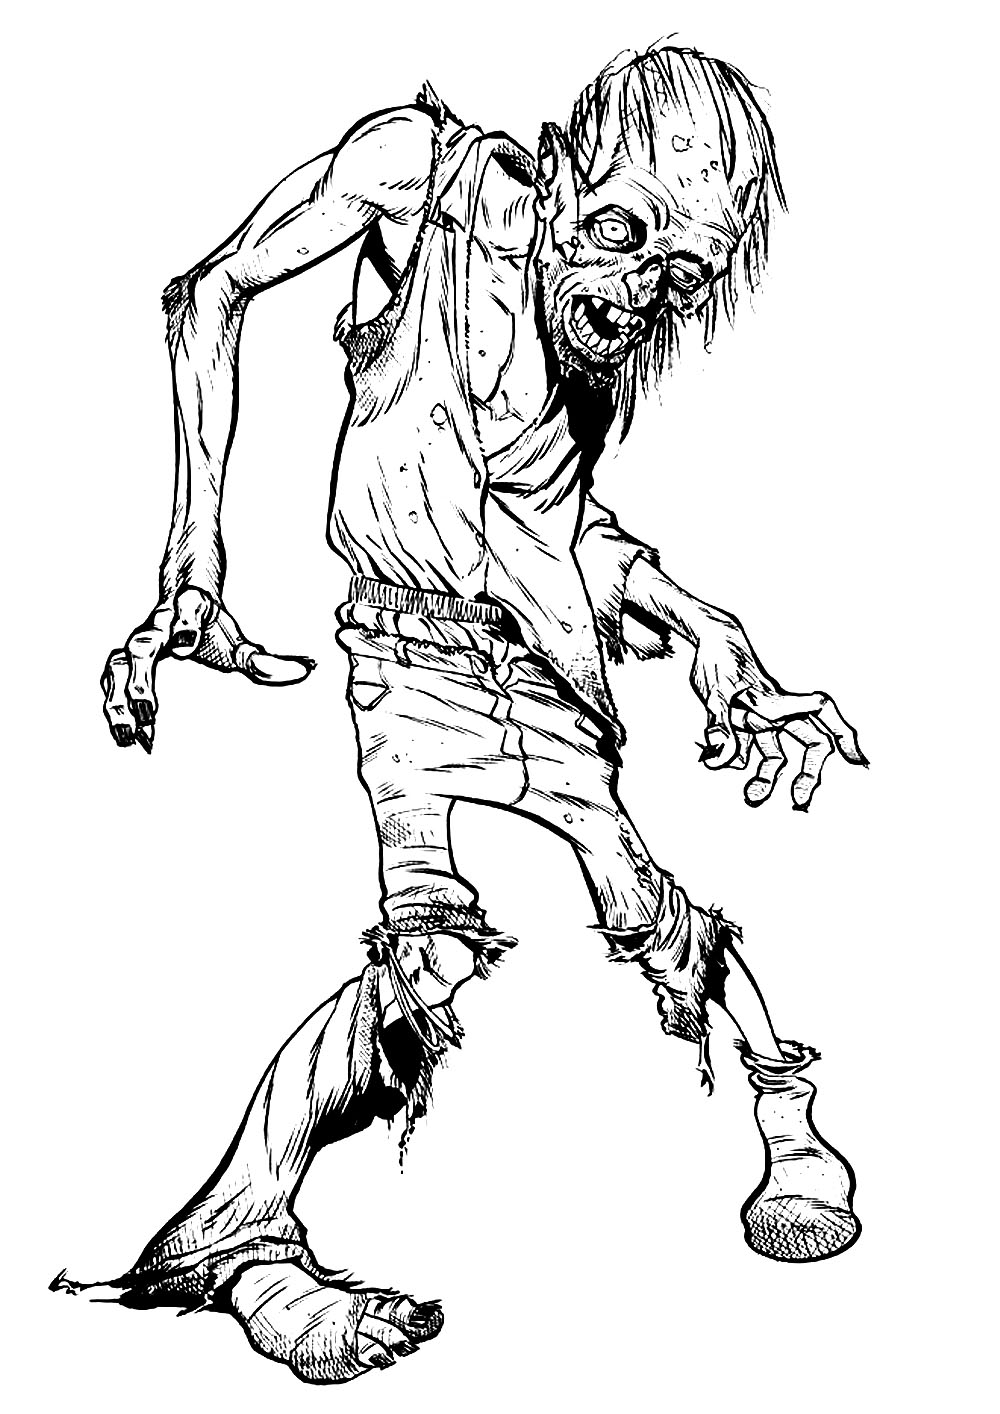 Zombie walking - Halloween Adult Coloring Pages